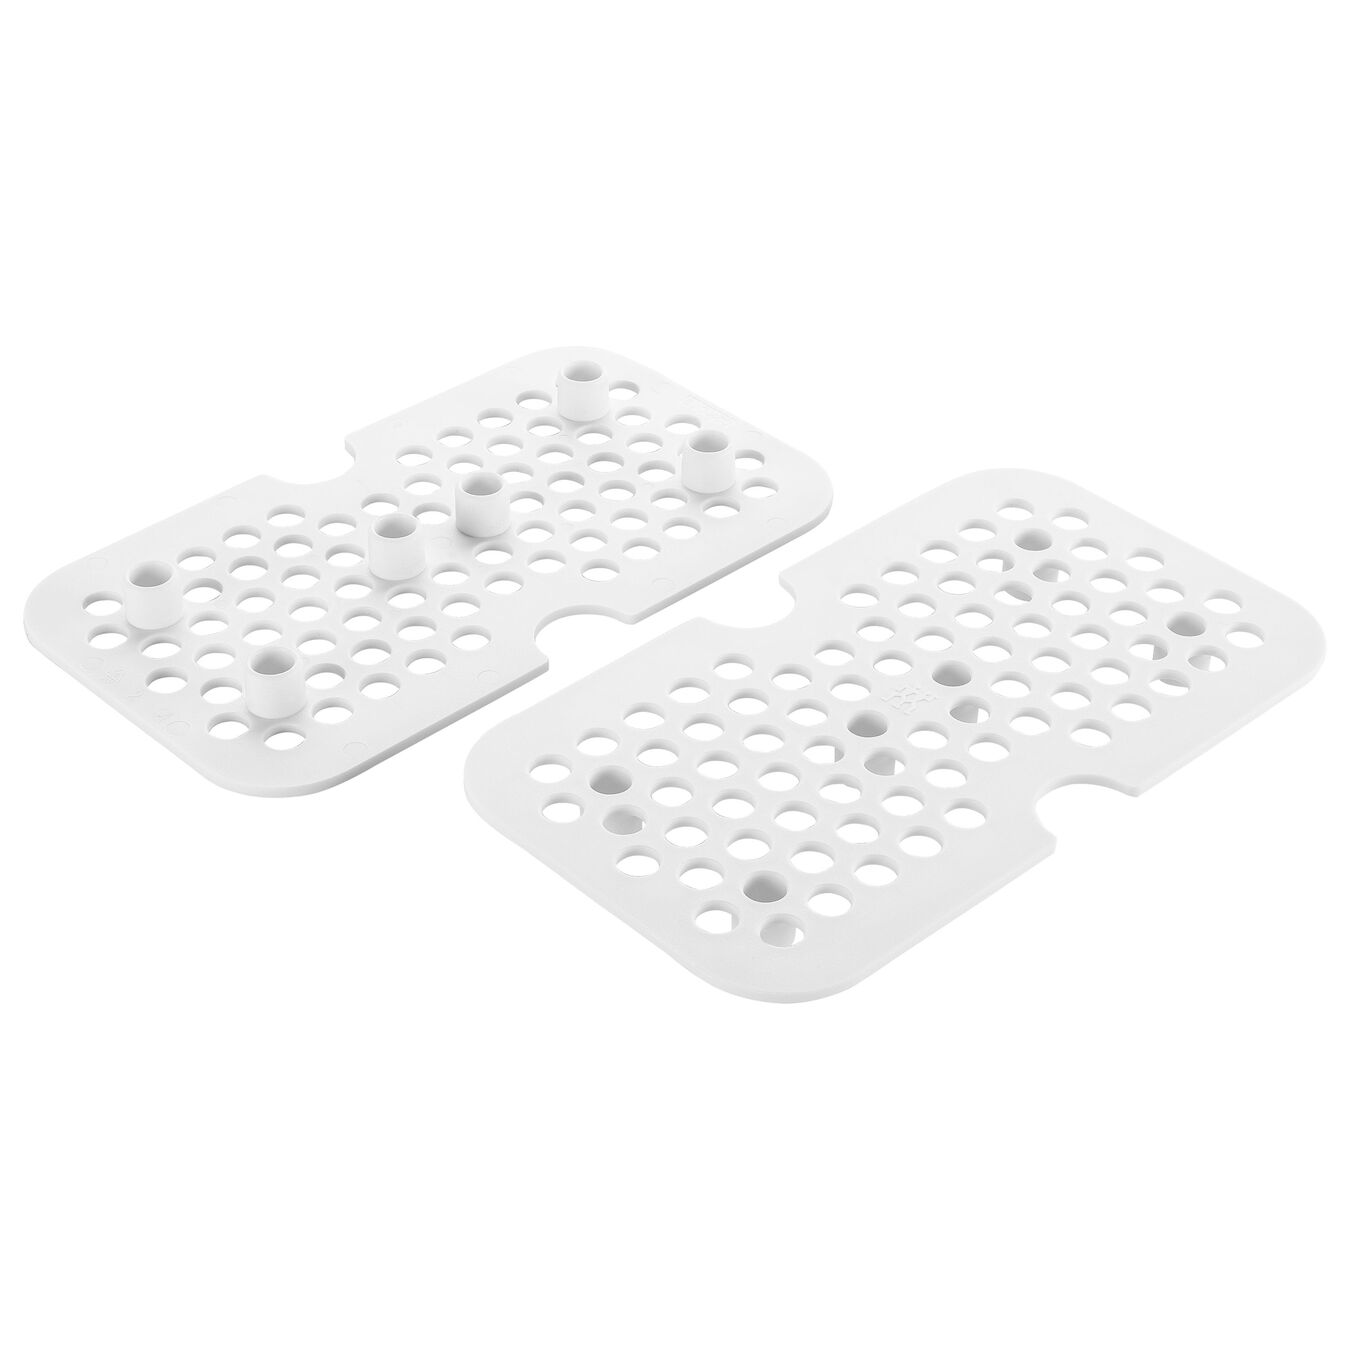 Vacuum accessory set drip tray for glass boxes, medium/large / 2 Piece,,large 3